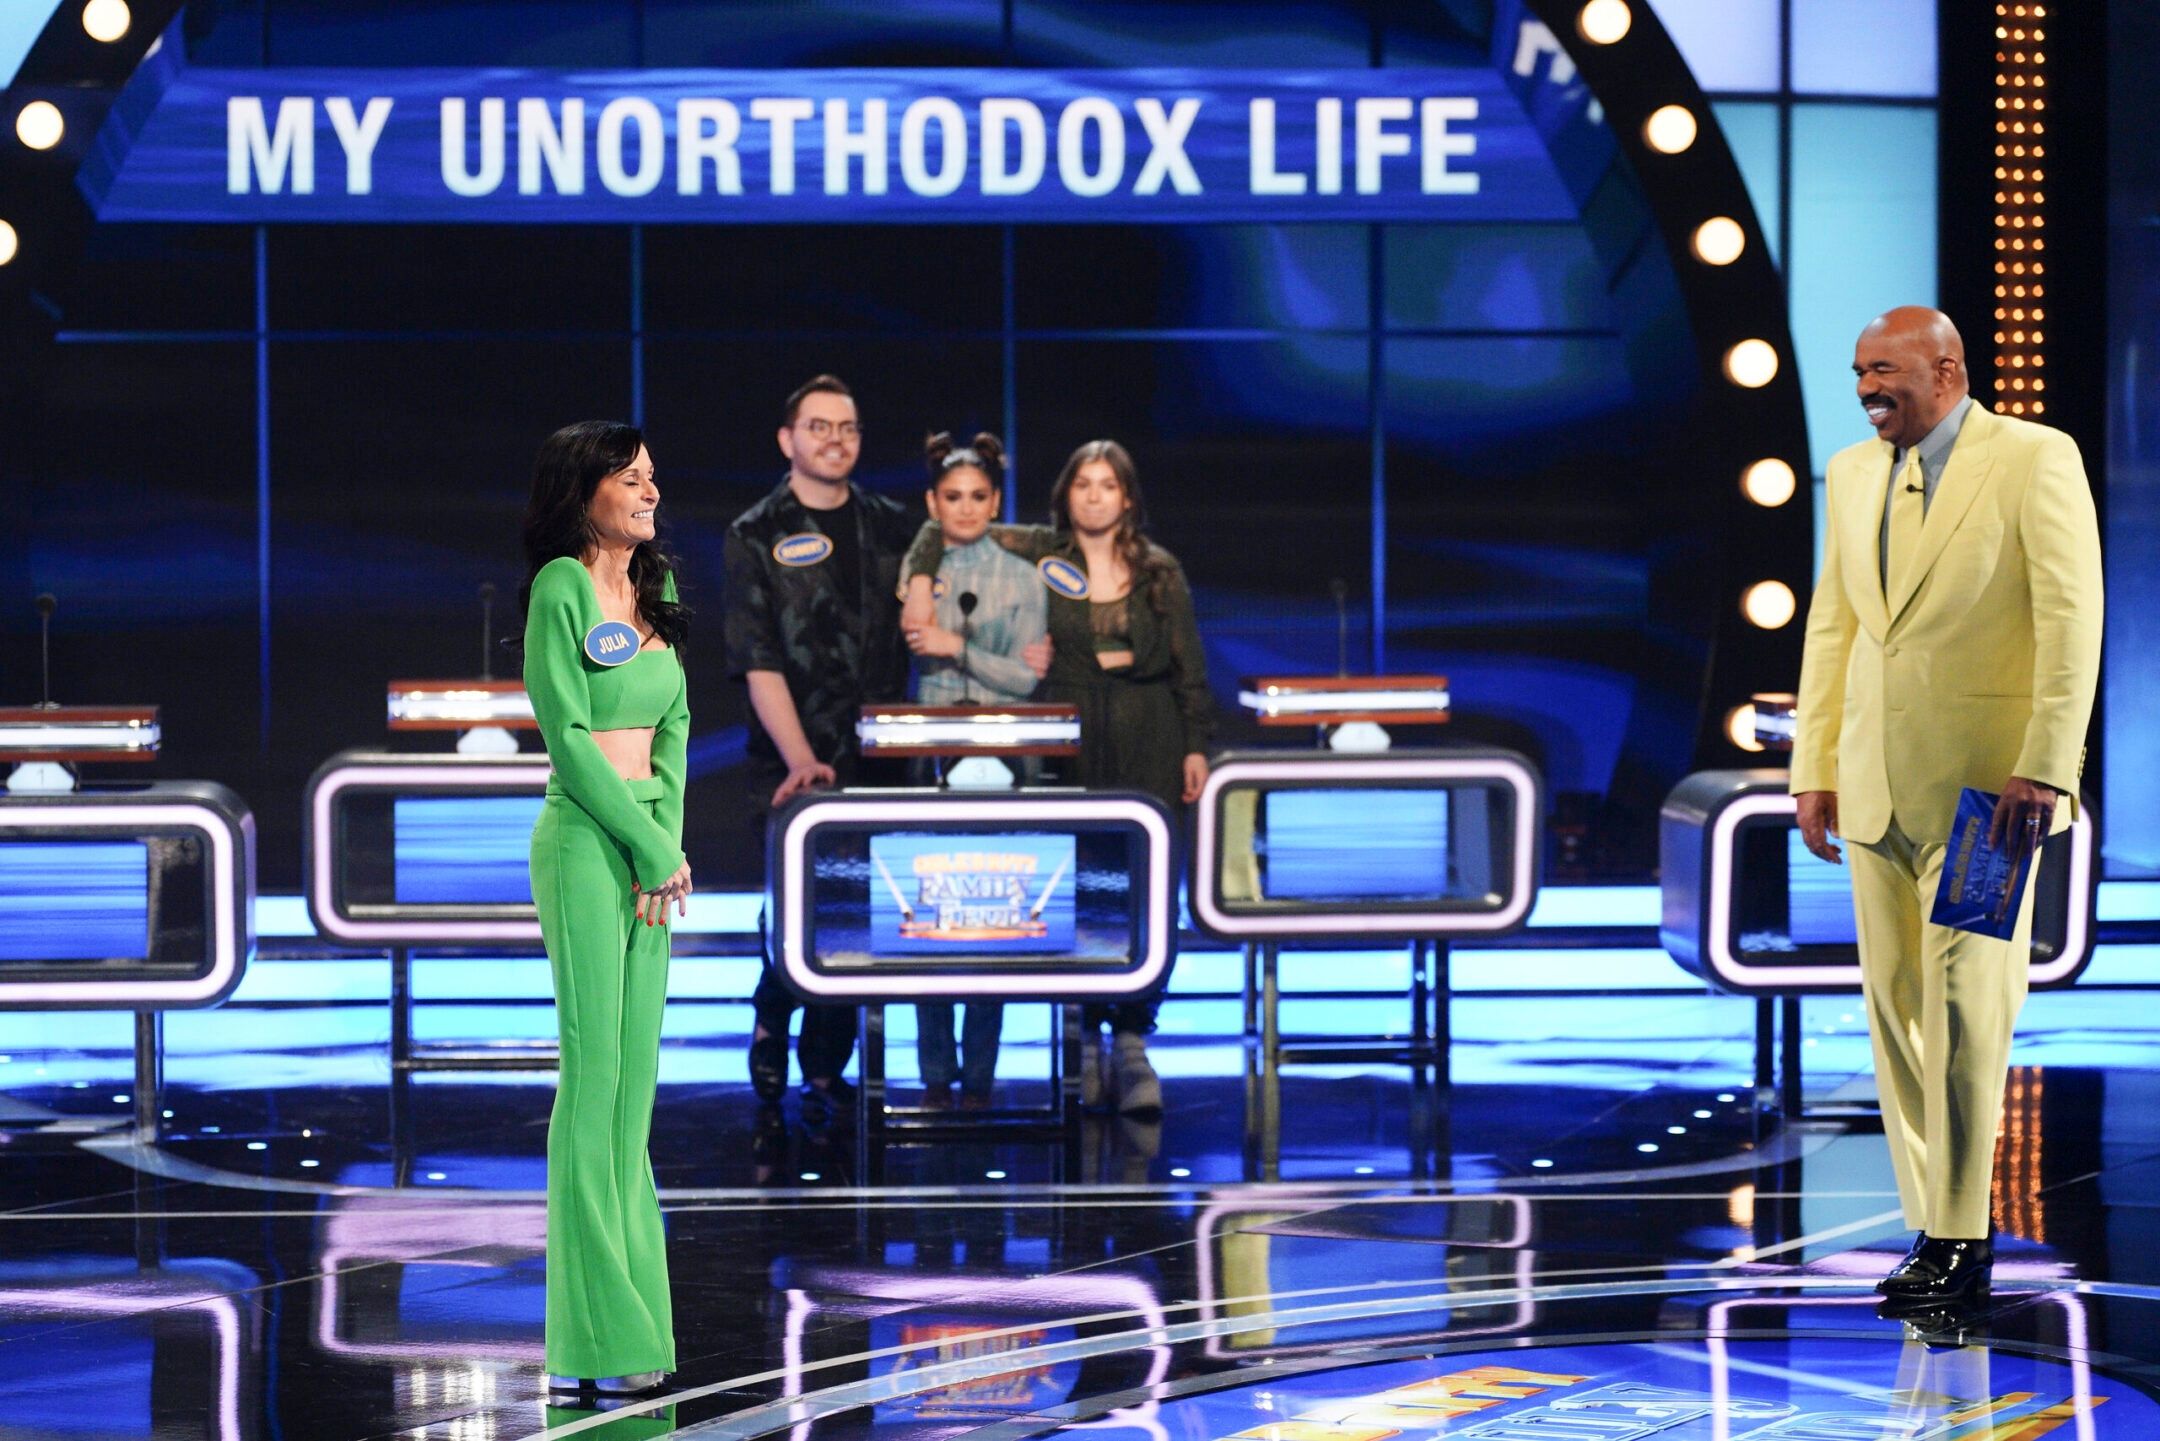 ‘My Unorthodox Life’ family wins $25,000 for anti-child marriage group on ‘Celebrity Family Feud’